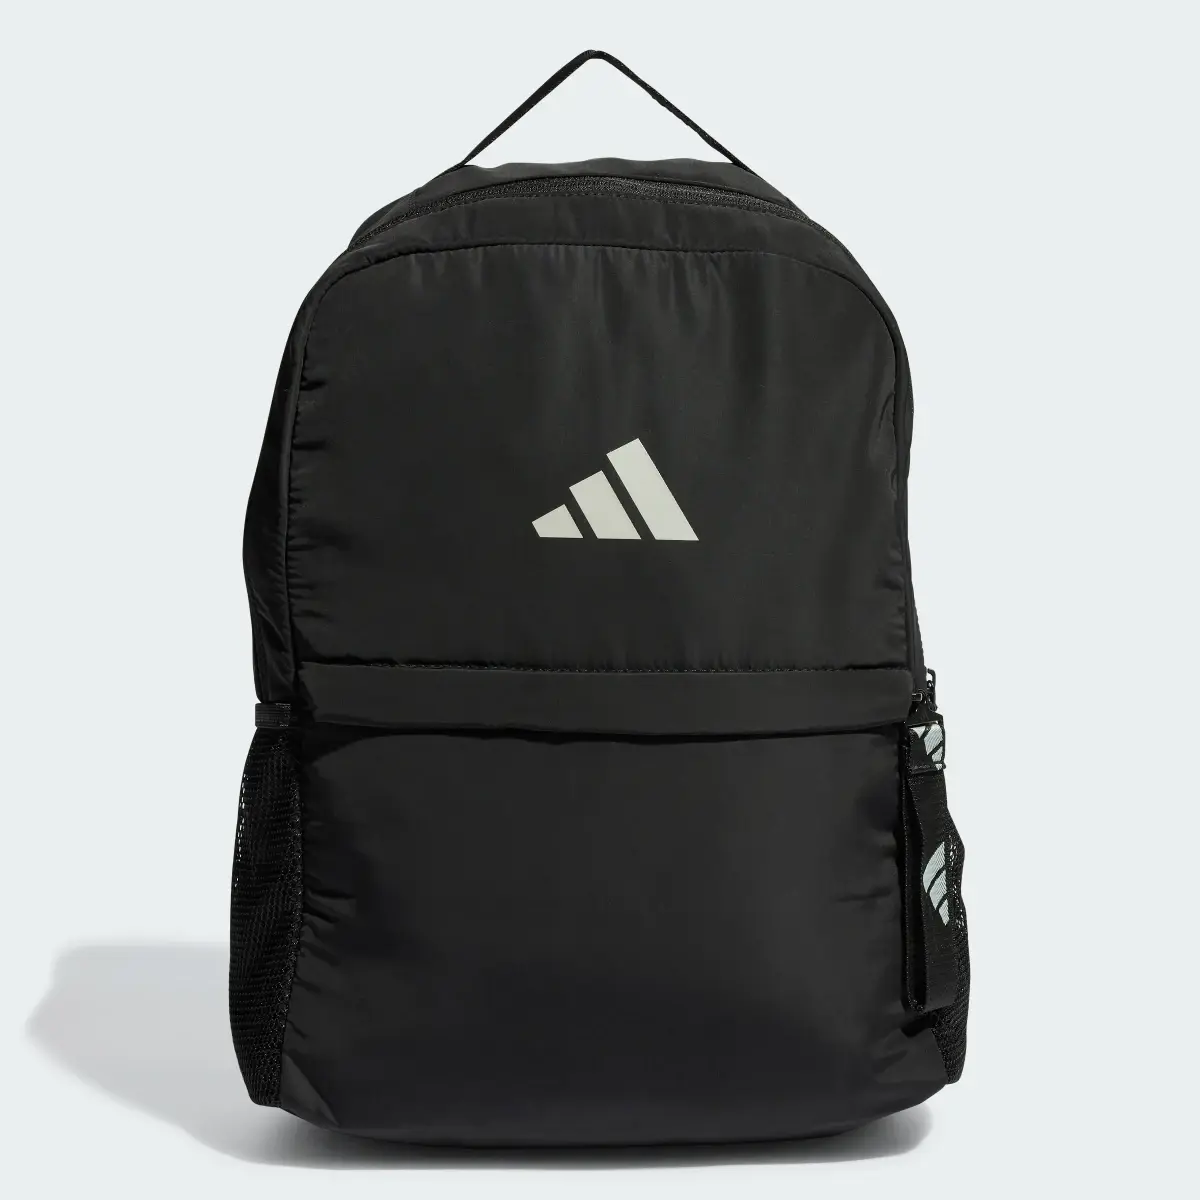 Adidas Sport Padded Backpack. 1